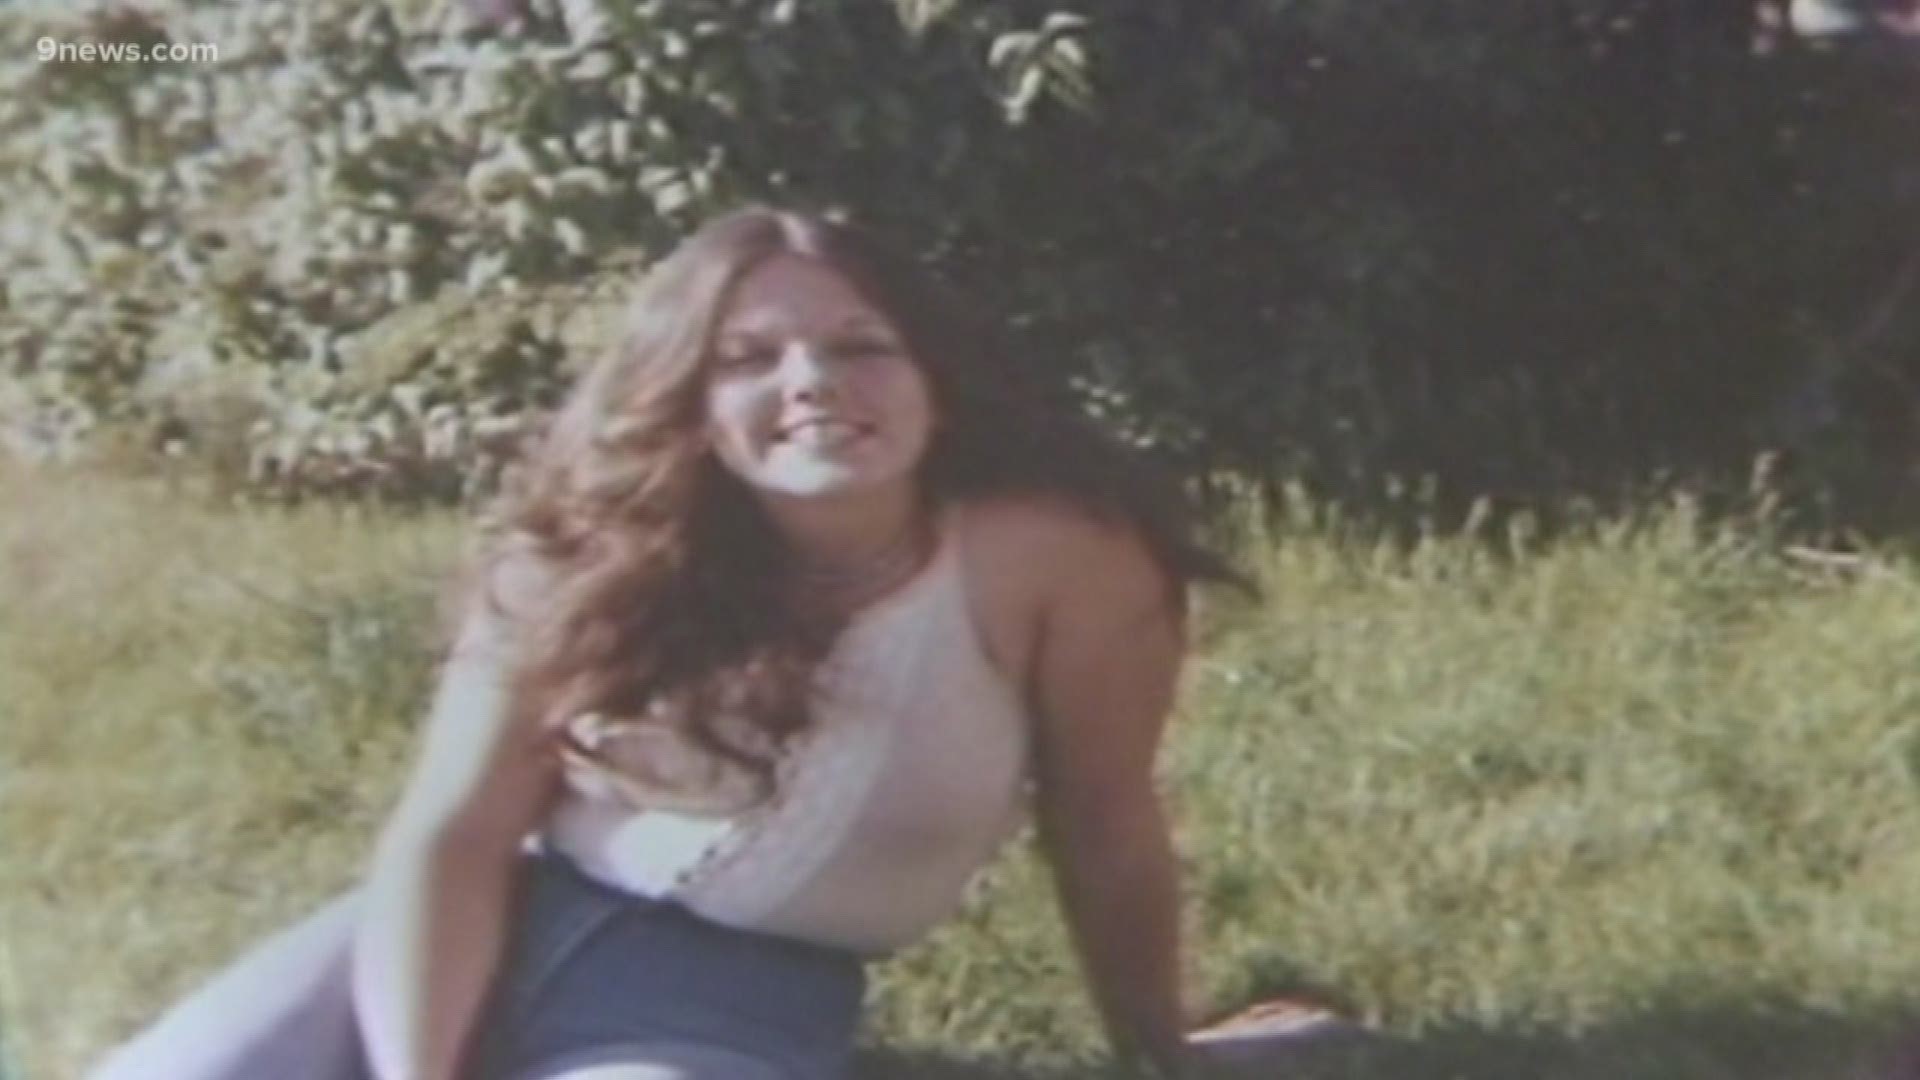 Jeannie Moore disappeared on Aug. 25, 1981. Her body was found five days later.